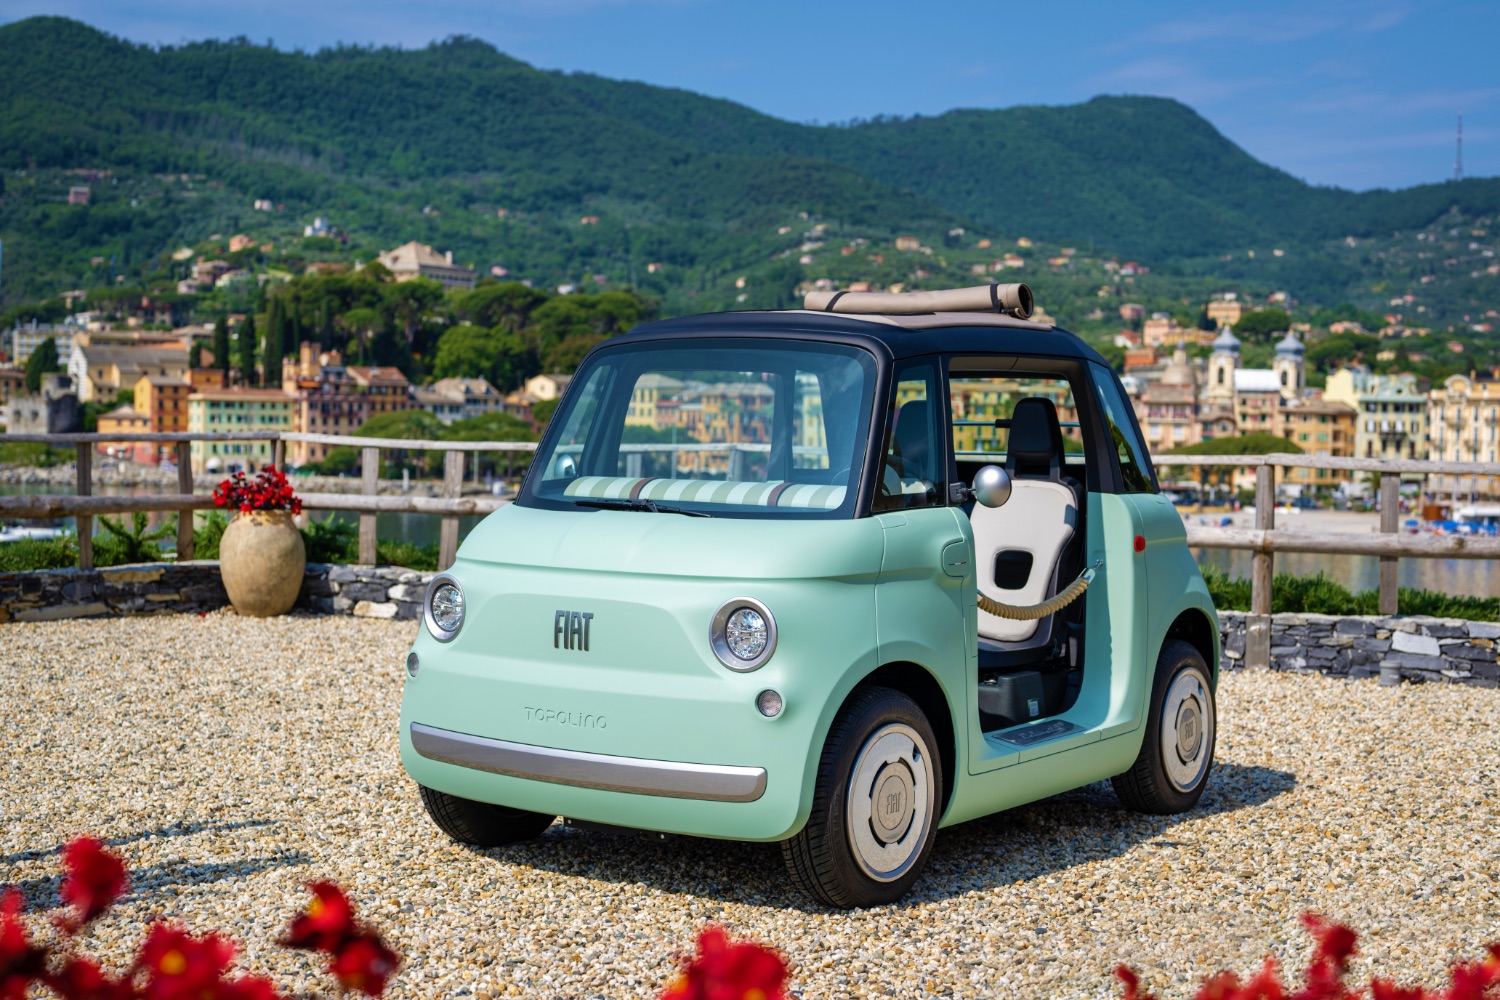 Fiat revives Topolino name for new quadricycle